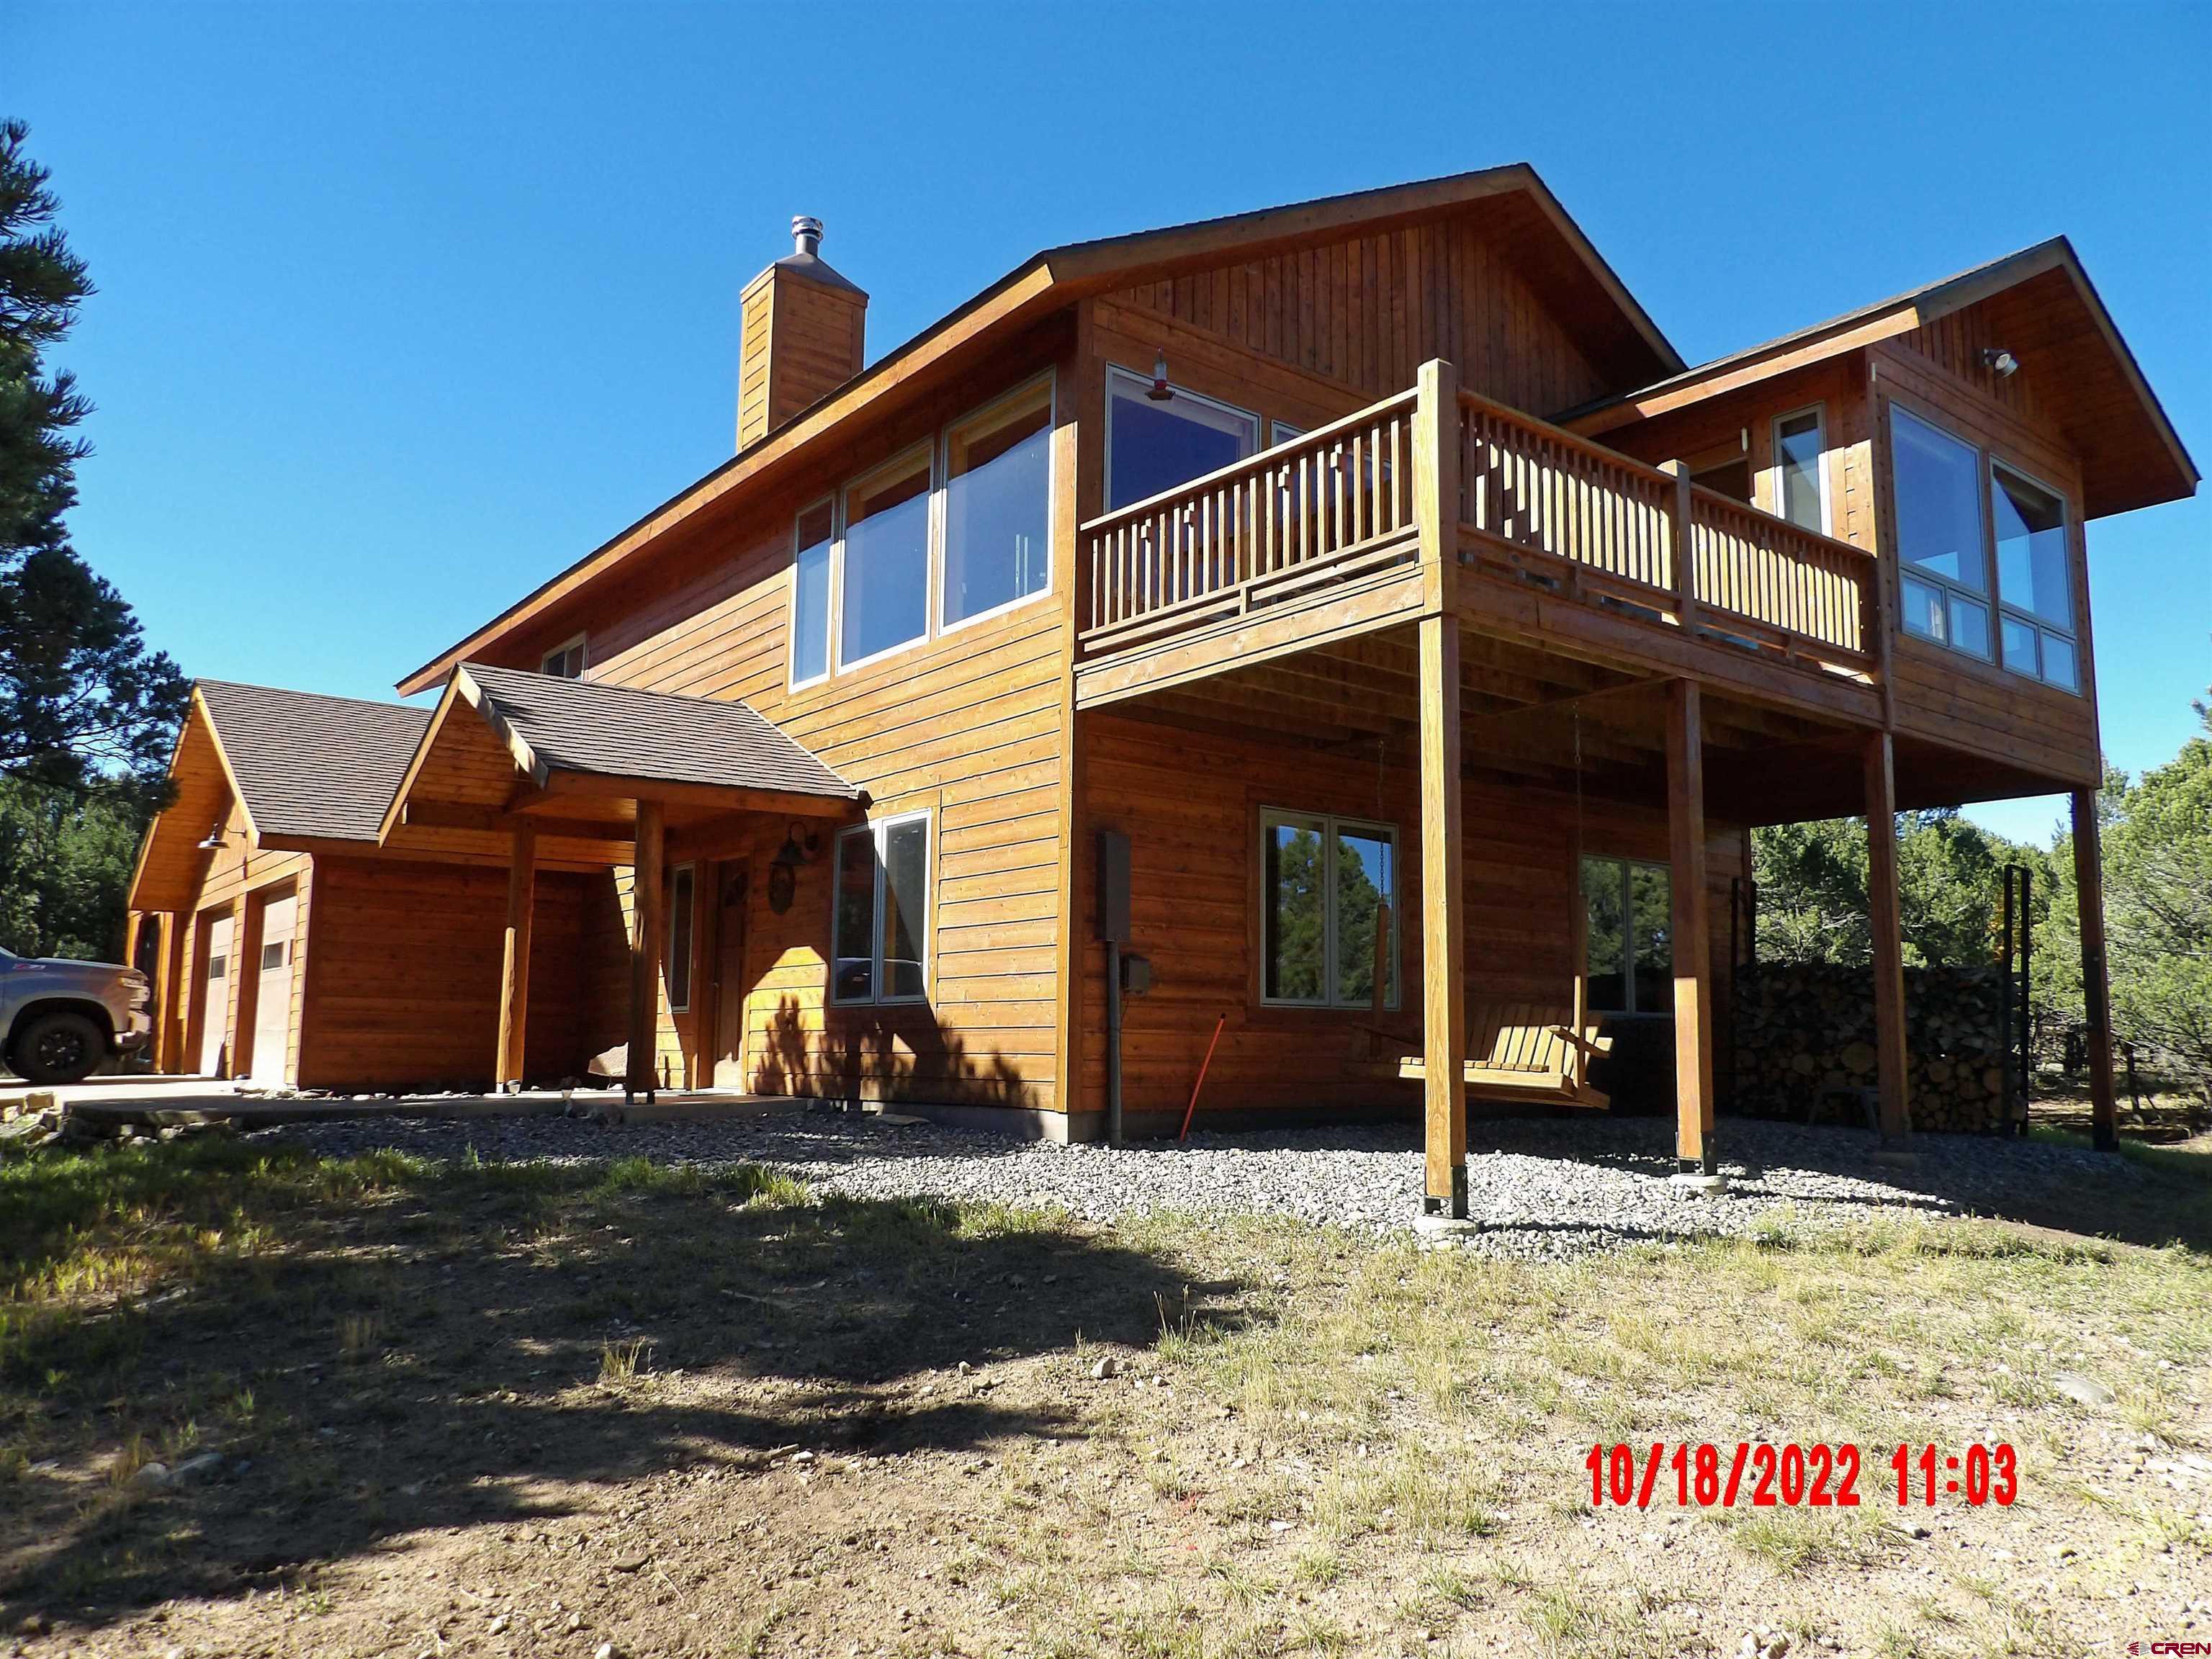 Well maintained and recently remodeled over the past 3 years.  Great views of the Cimarron Range of the San Juan Mountains, enjoy the fabulous alpenglow sunsets, the unbelievable moon rising, as well as the inspiring sunrises.  The house is very energy efficient with spray form insulation in the walls, under the lower level slab and in the attic. There are also triple pane windows and a glass front woodstove to add warmth and comfort to the living areas. Vaulted ceilings with wood beams and wood ceiling in the living room, kitchen and dining room.  The dining room has windows on 3 sides to enjoy the natural beauty of the mountains, valleys and the local wildlife.  A list of the improvements includes: repainting the interior, hardwood flooring, new carpet in the bedrooms, den, master bedroom, with extra plush padding in the den and master, full renovation of the master bath, new sink, granite counter, faucets, shower head and shower door in the downstairs bathroom. The den and master bedroom hve new ceiling fans.  The kitchen changes are: leathered granite counter tops, new stove/oven, whisper quiet dispposal, new sink and faucet, new dishwasher, new bronze cabinet hardware.   Added to the property is a heated gym building (this could be used as a workshop, studio or more).  The area around the house has been cleared to meet the defensible space for wild fire requirements.  This 3 bedroom, 2.25 bath, with separate office/den/studio is move in ready.  If you like to walk and hike the Loghill Park and Recreation District has several miles of well marked hiking trails (some go along the escarpment for a couple of miles.  The pave roads are wonderful for walking and biking as well. Make sure you see this wonderful home and property, priced less per sq. ft. than other comparable homes in the area.  Access is all on paved roads, all utilities are underground. Easy and quick drive to Montrose. Montrose has one of the best regional airports in Colorado. Less than an hour to Telluride, less than half hour to Ouray and even quicker to Ridgway and Ridgway Reservoir. This property is close to all the outdoor sports activities, Great Skiing in Telluride as well as all the festivals offered in the area. GO AHEAD AND SPOIL YOURSELF BY LIVING MAGICAL AREA OF SOUTHWEST COLORADO!